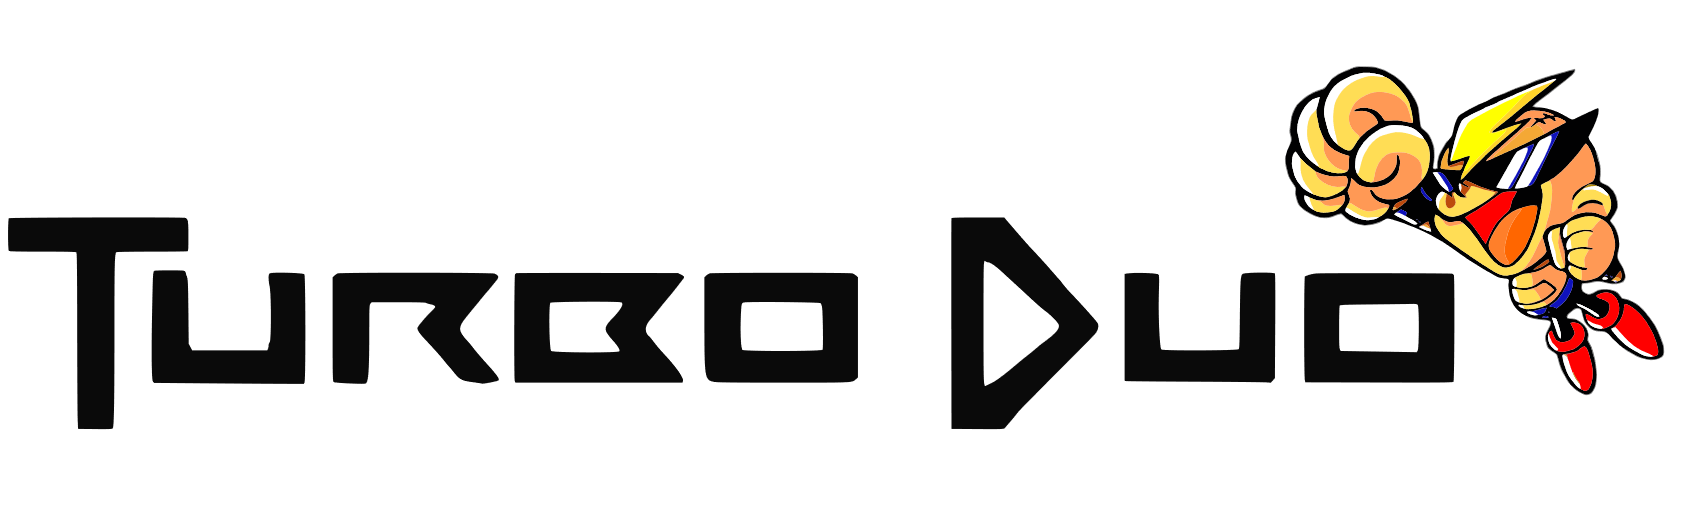 NEC_Turbo_Duo_2nd_Logo(highquality).png